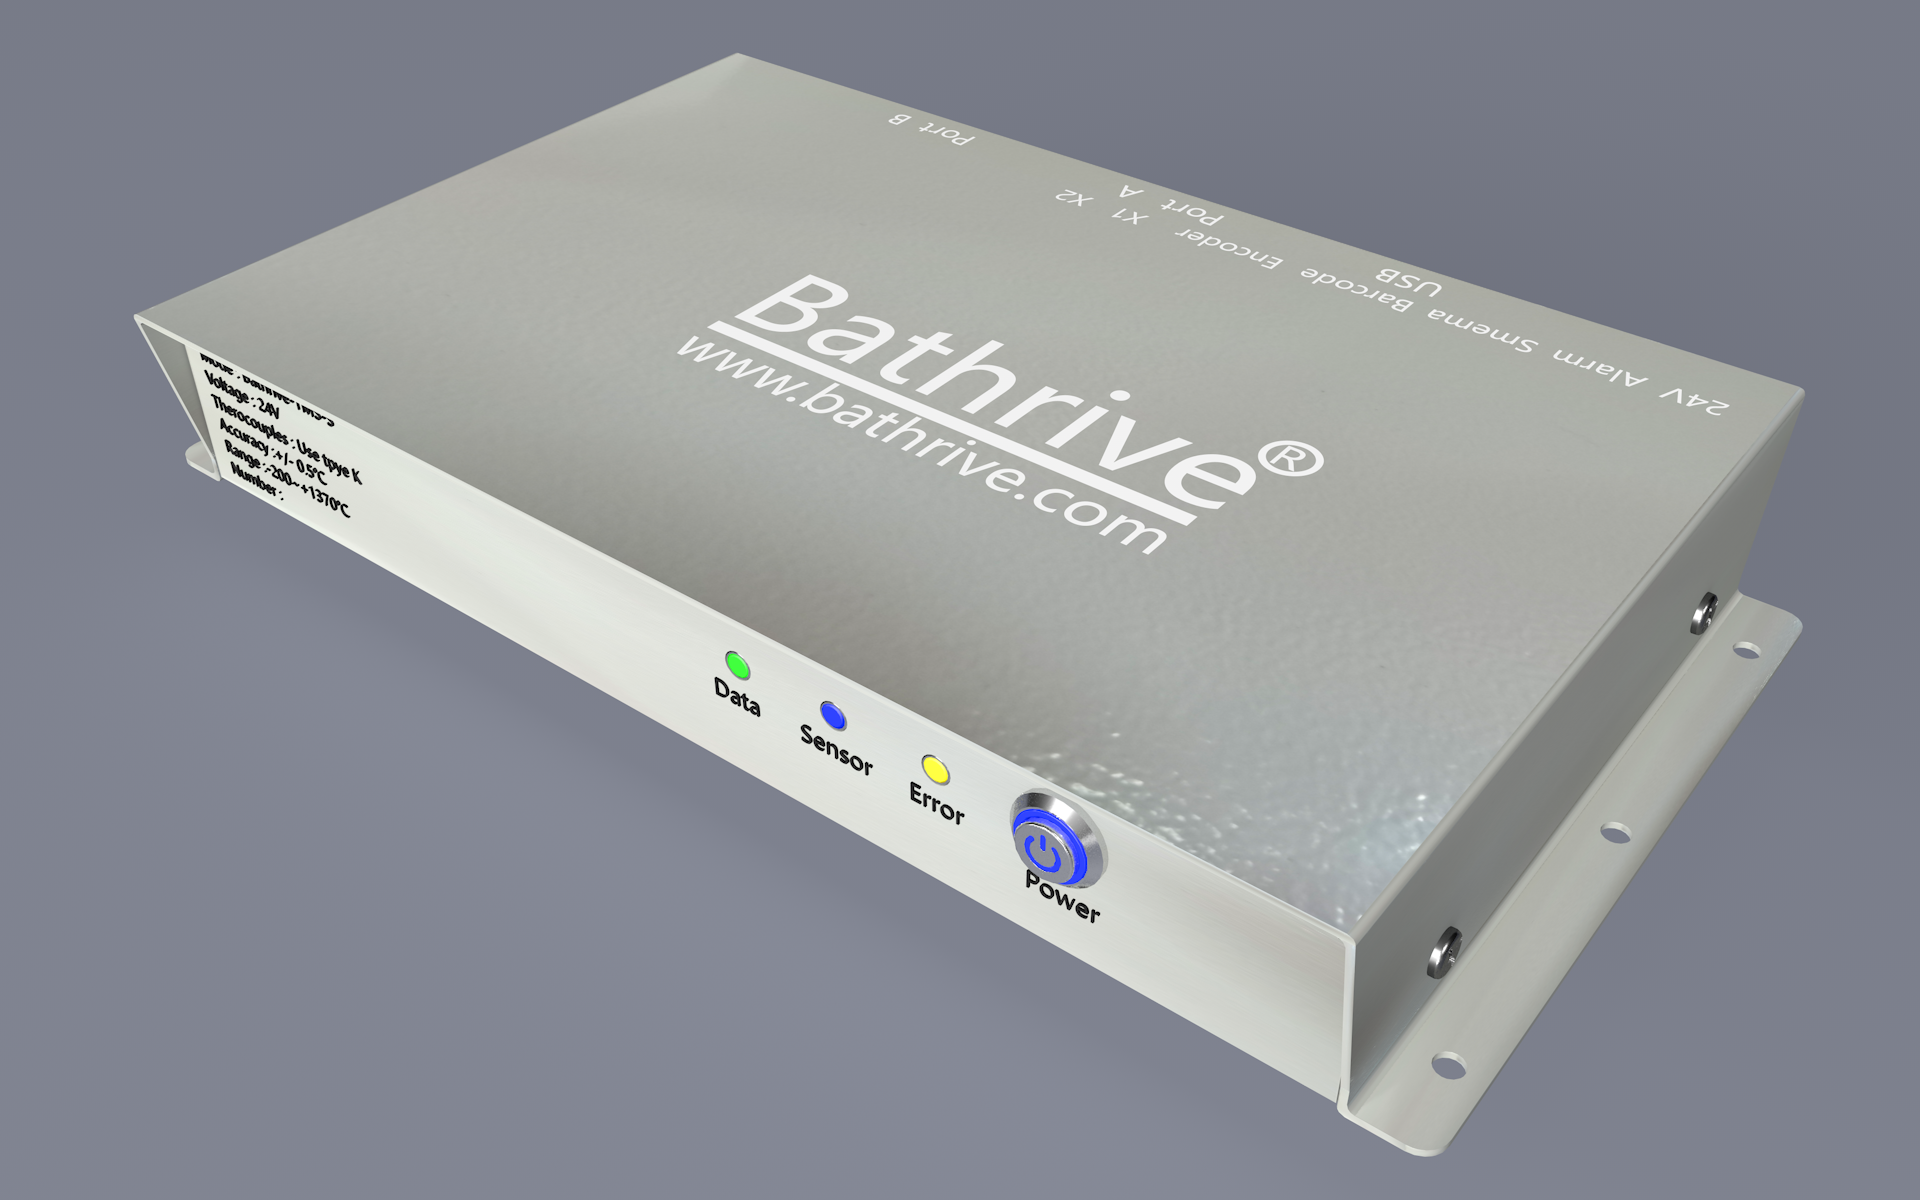 Bathrive-TMS Online furnace temperature monitoring system